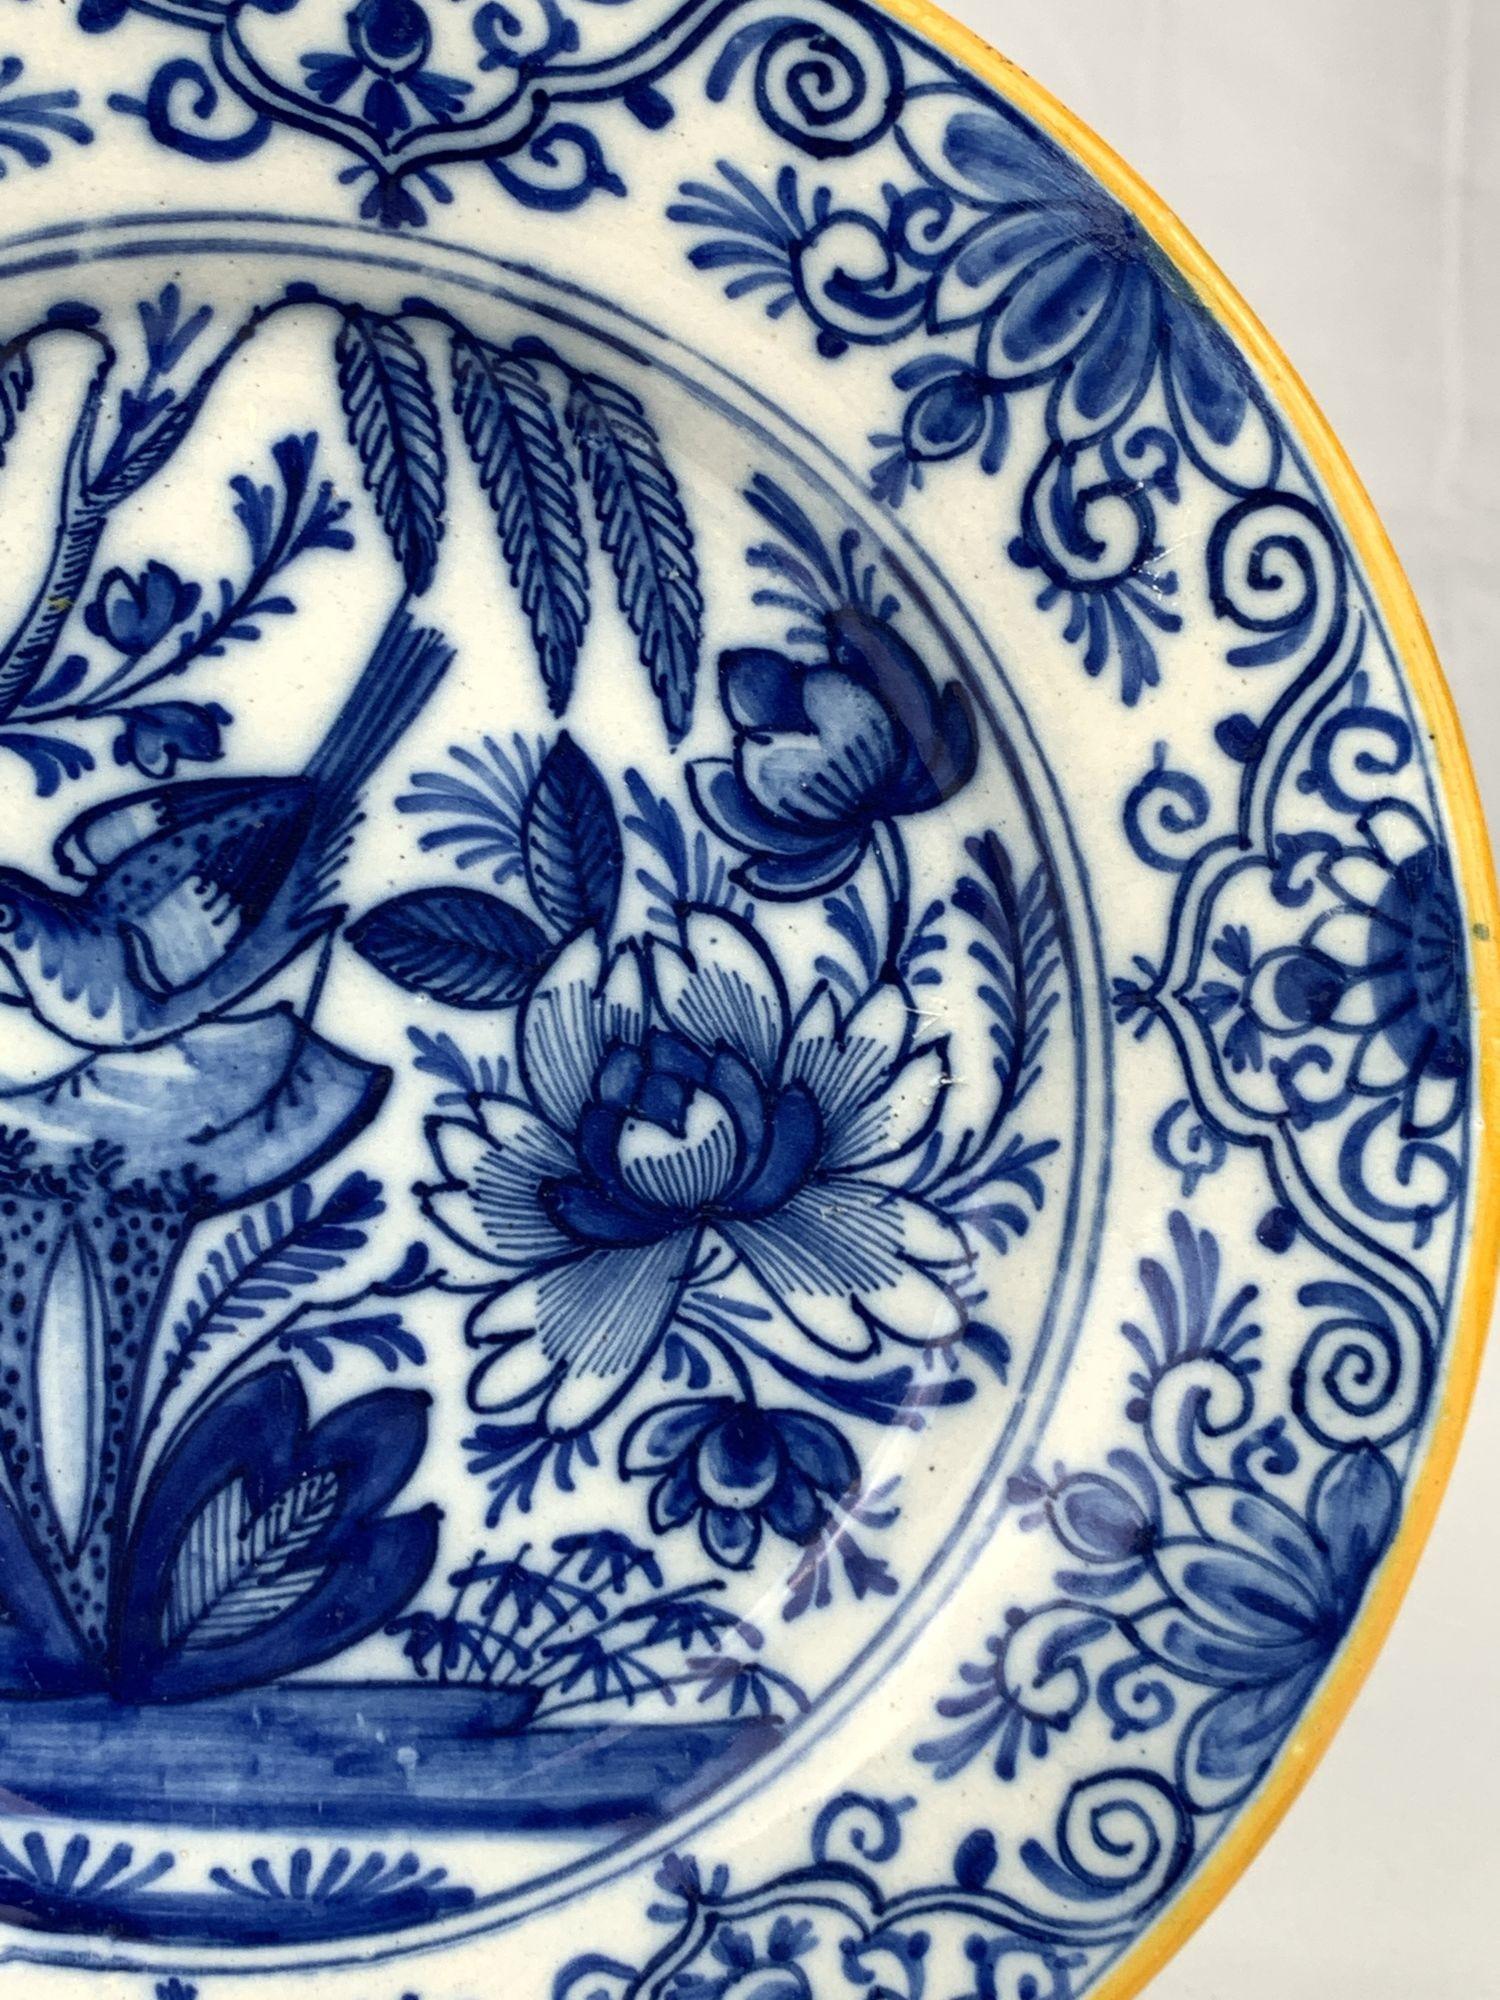 Blue and White Delft Plate with Bird Made Netherlands 18th Century Circa 1780 For Sale 2